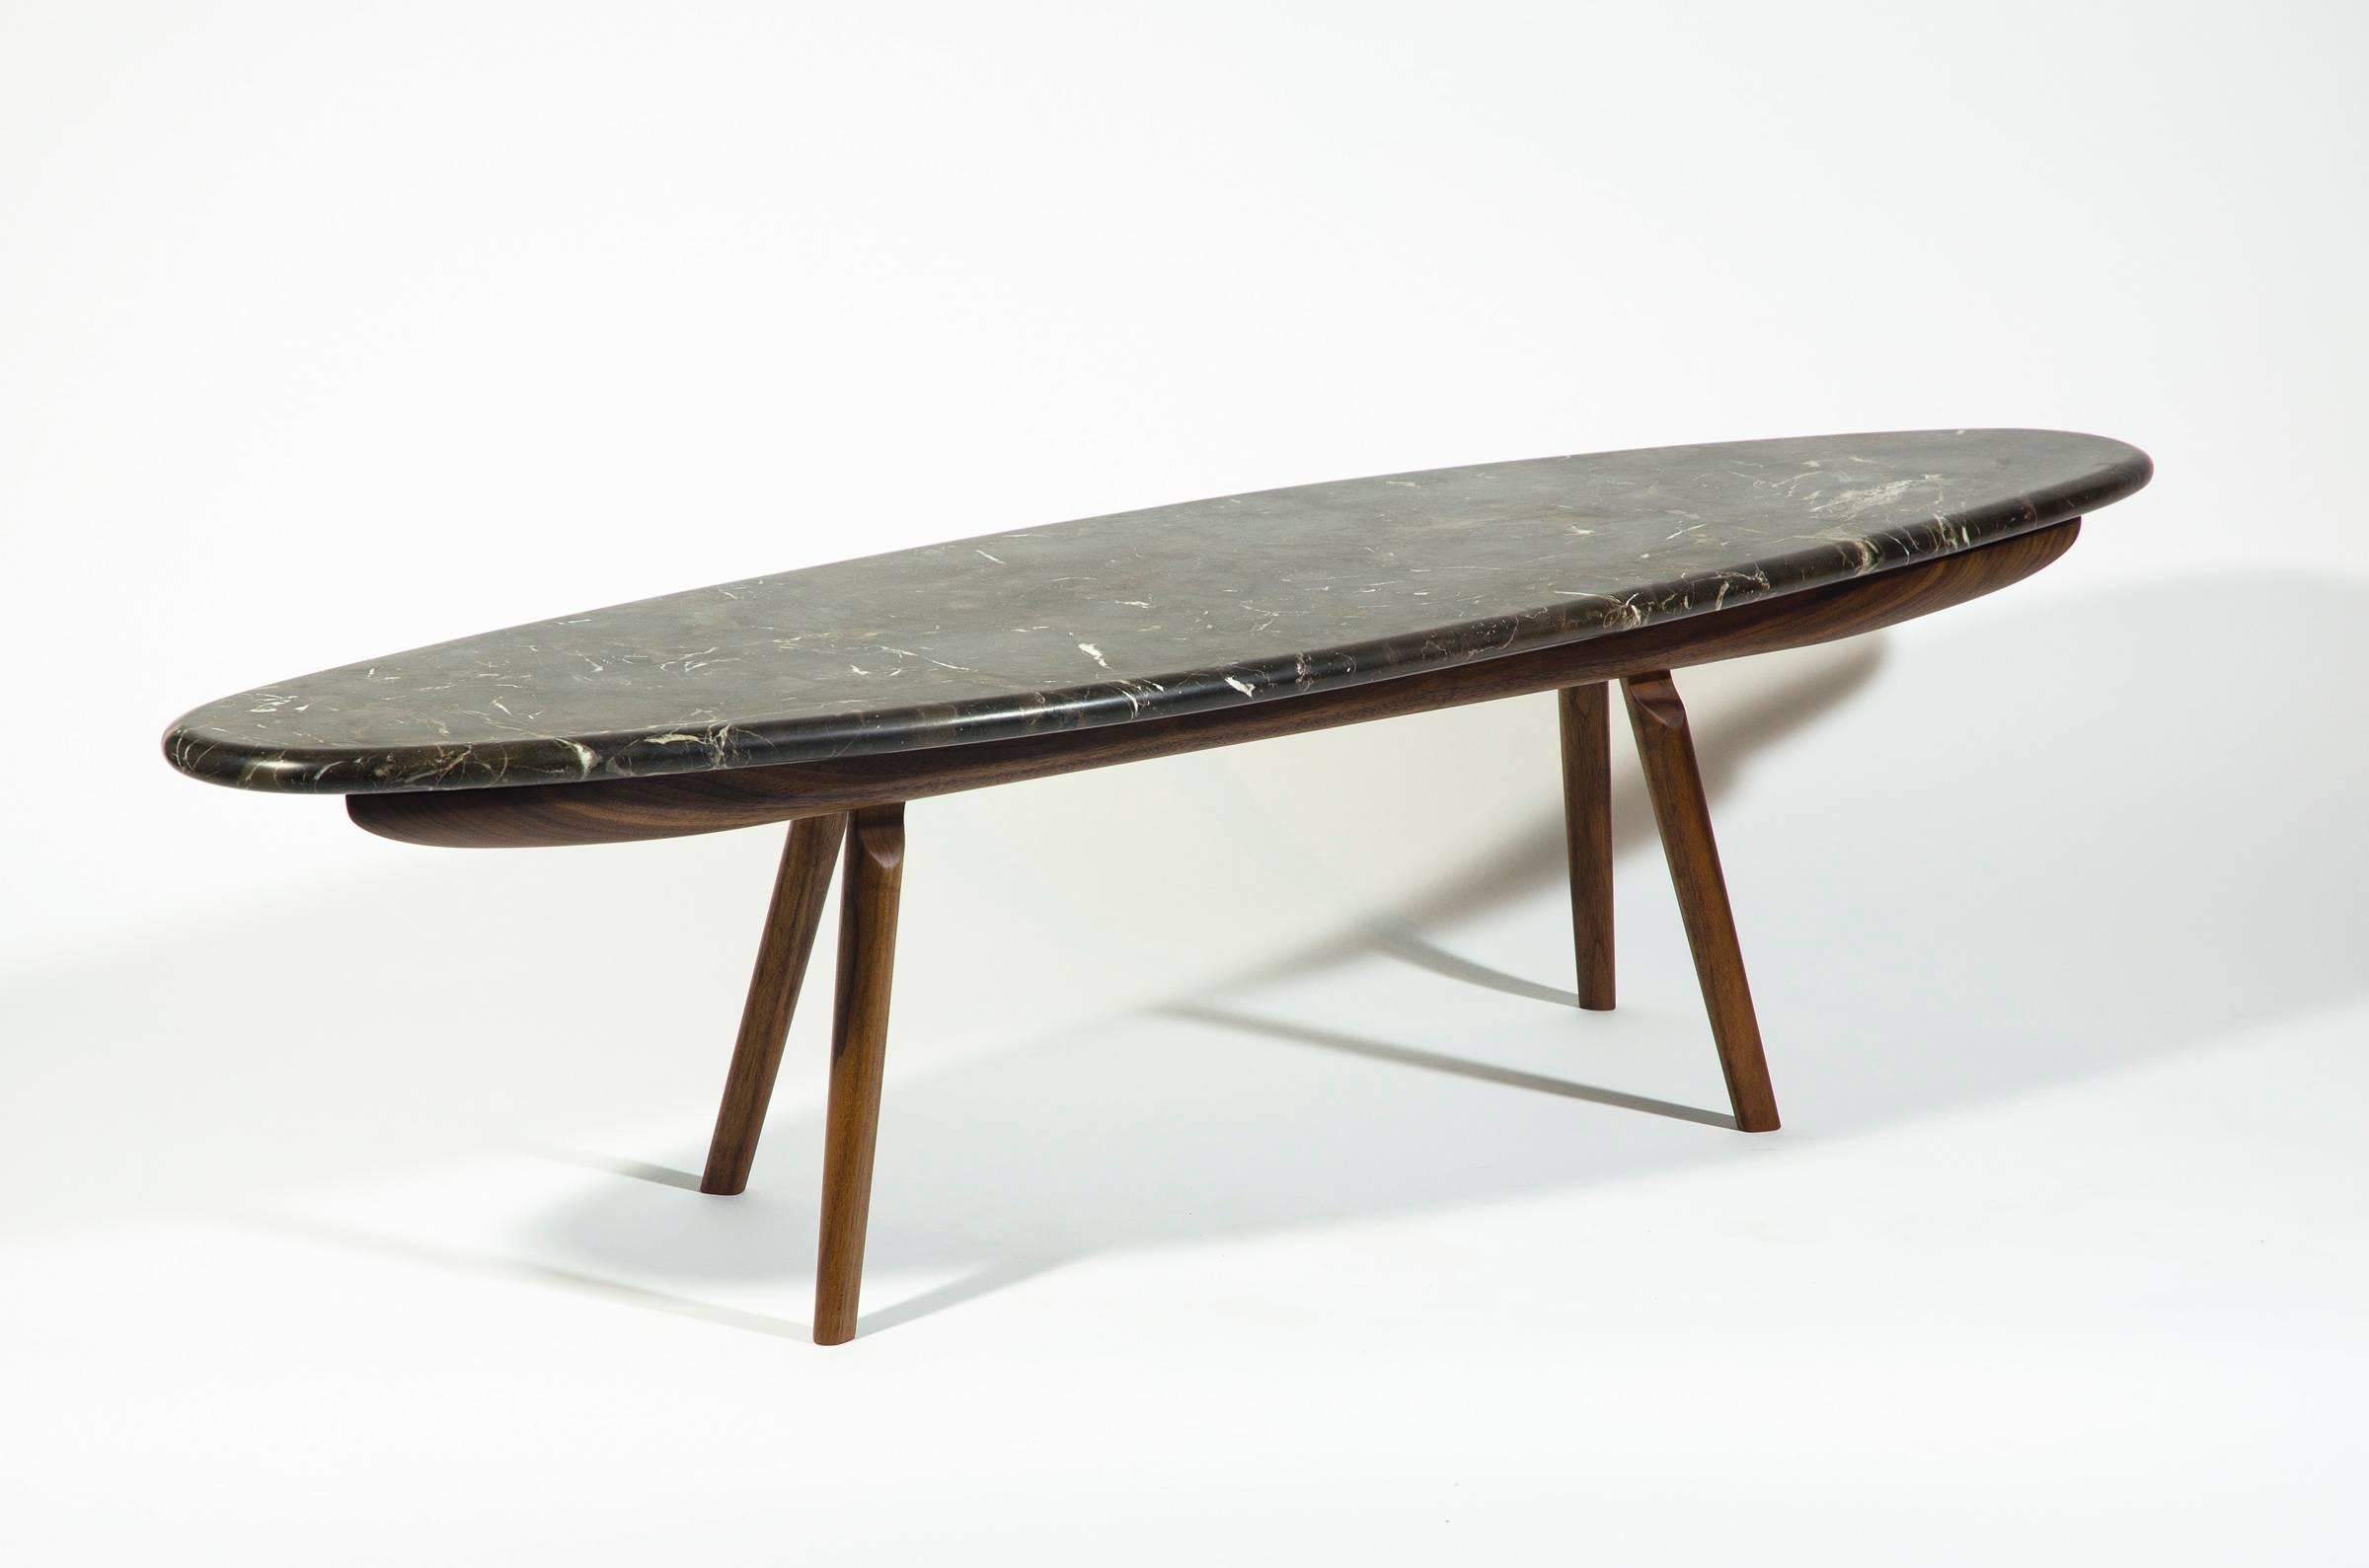 Contemporary Black Marble Stone and Walnut Wood Coffee Cocktail Table CBR Studio In New Condition For Sale In Brooklyn, NY